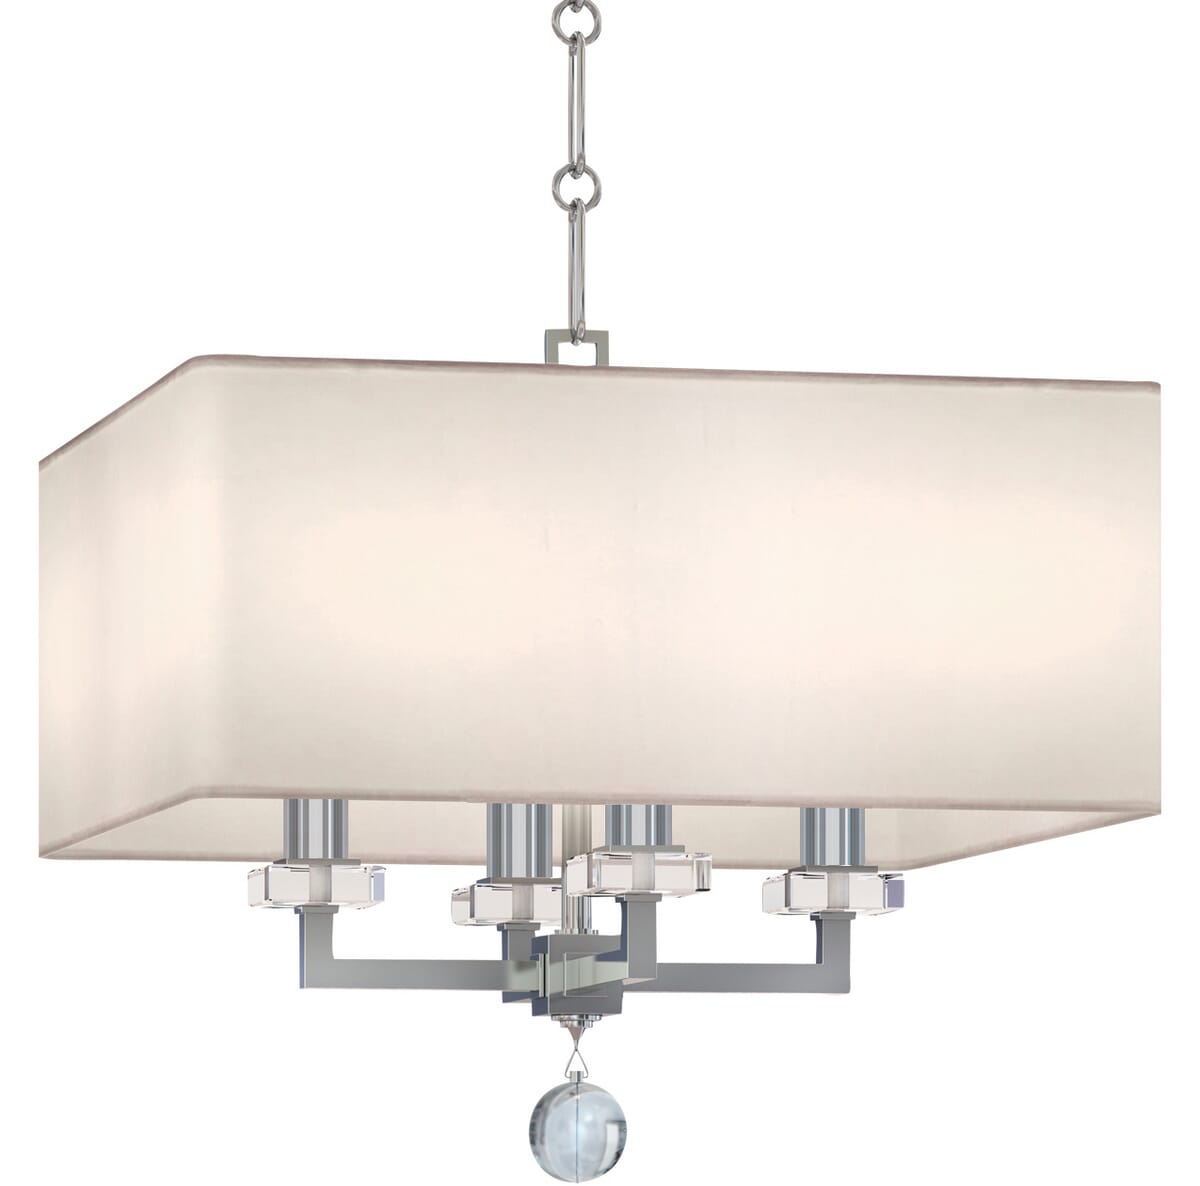 Paxton 4-Light 15"" Modern Chandelier in Polished Nickel -  Crystorama, 8105-PN